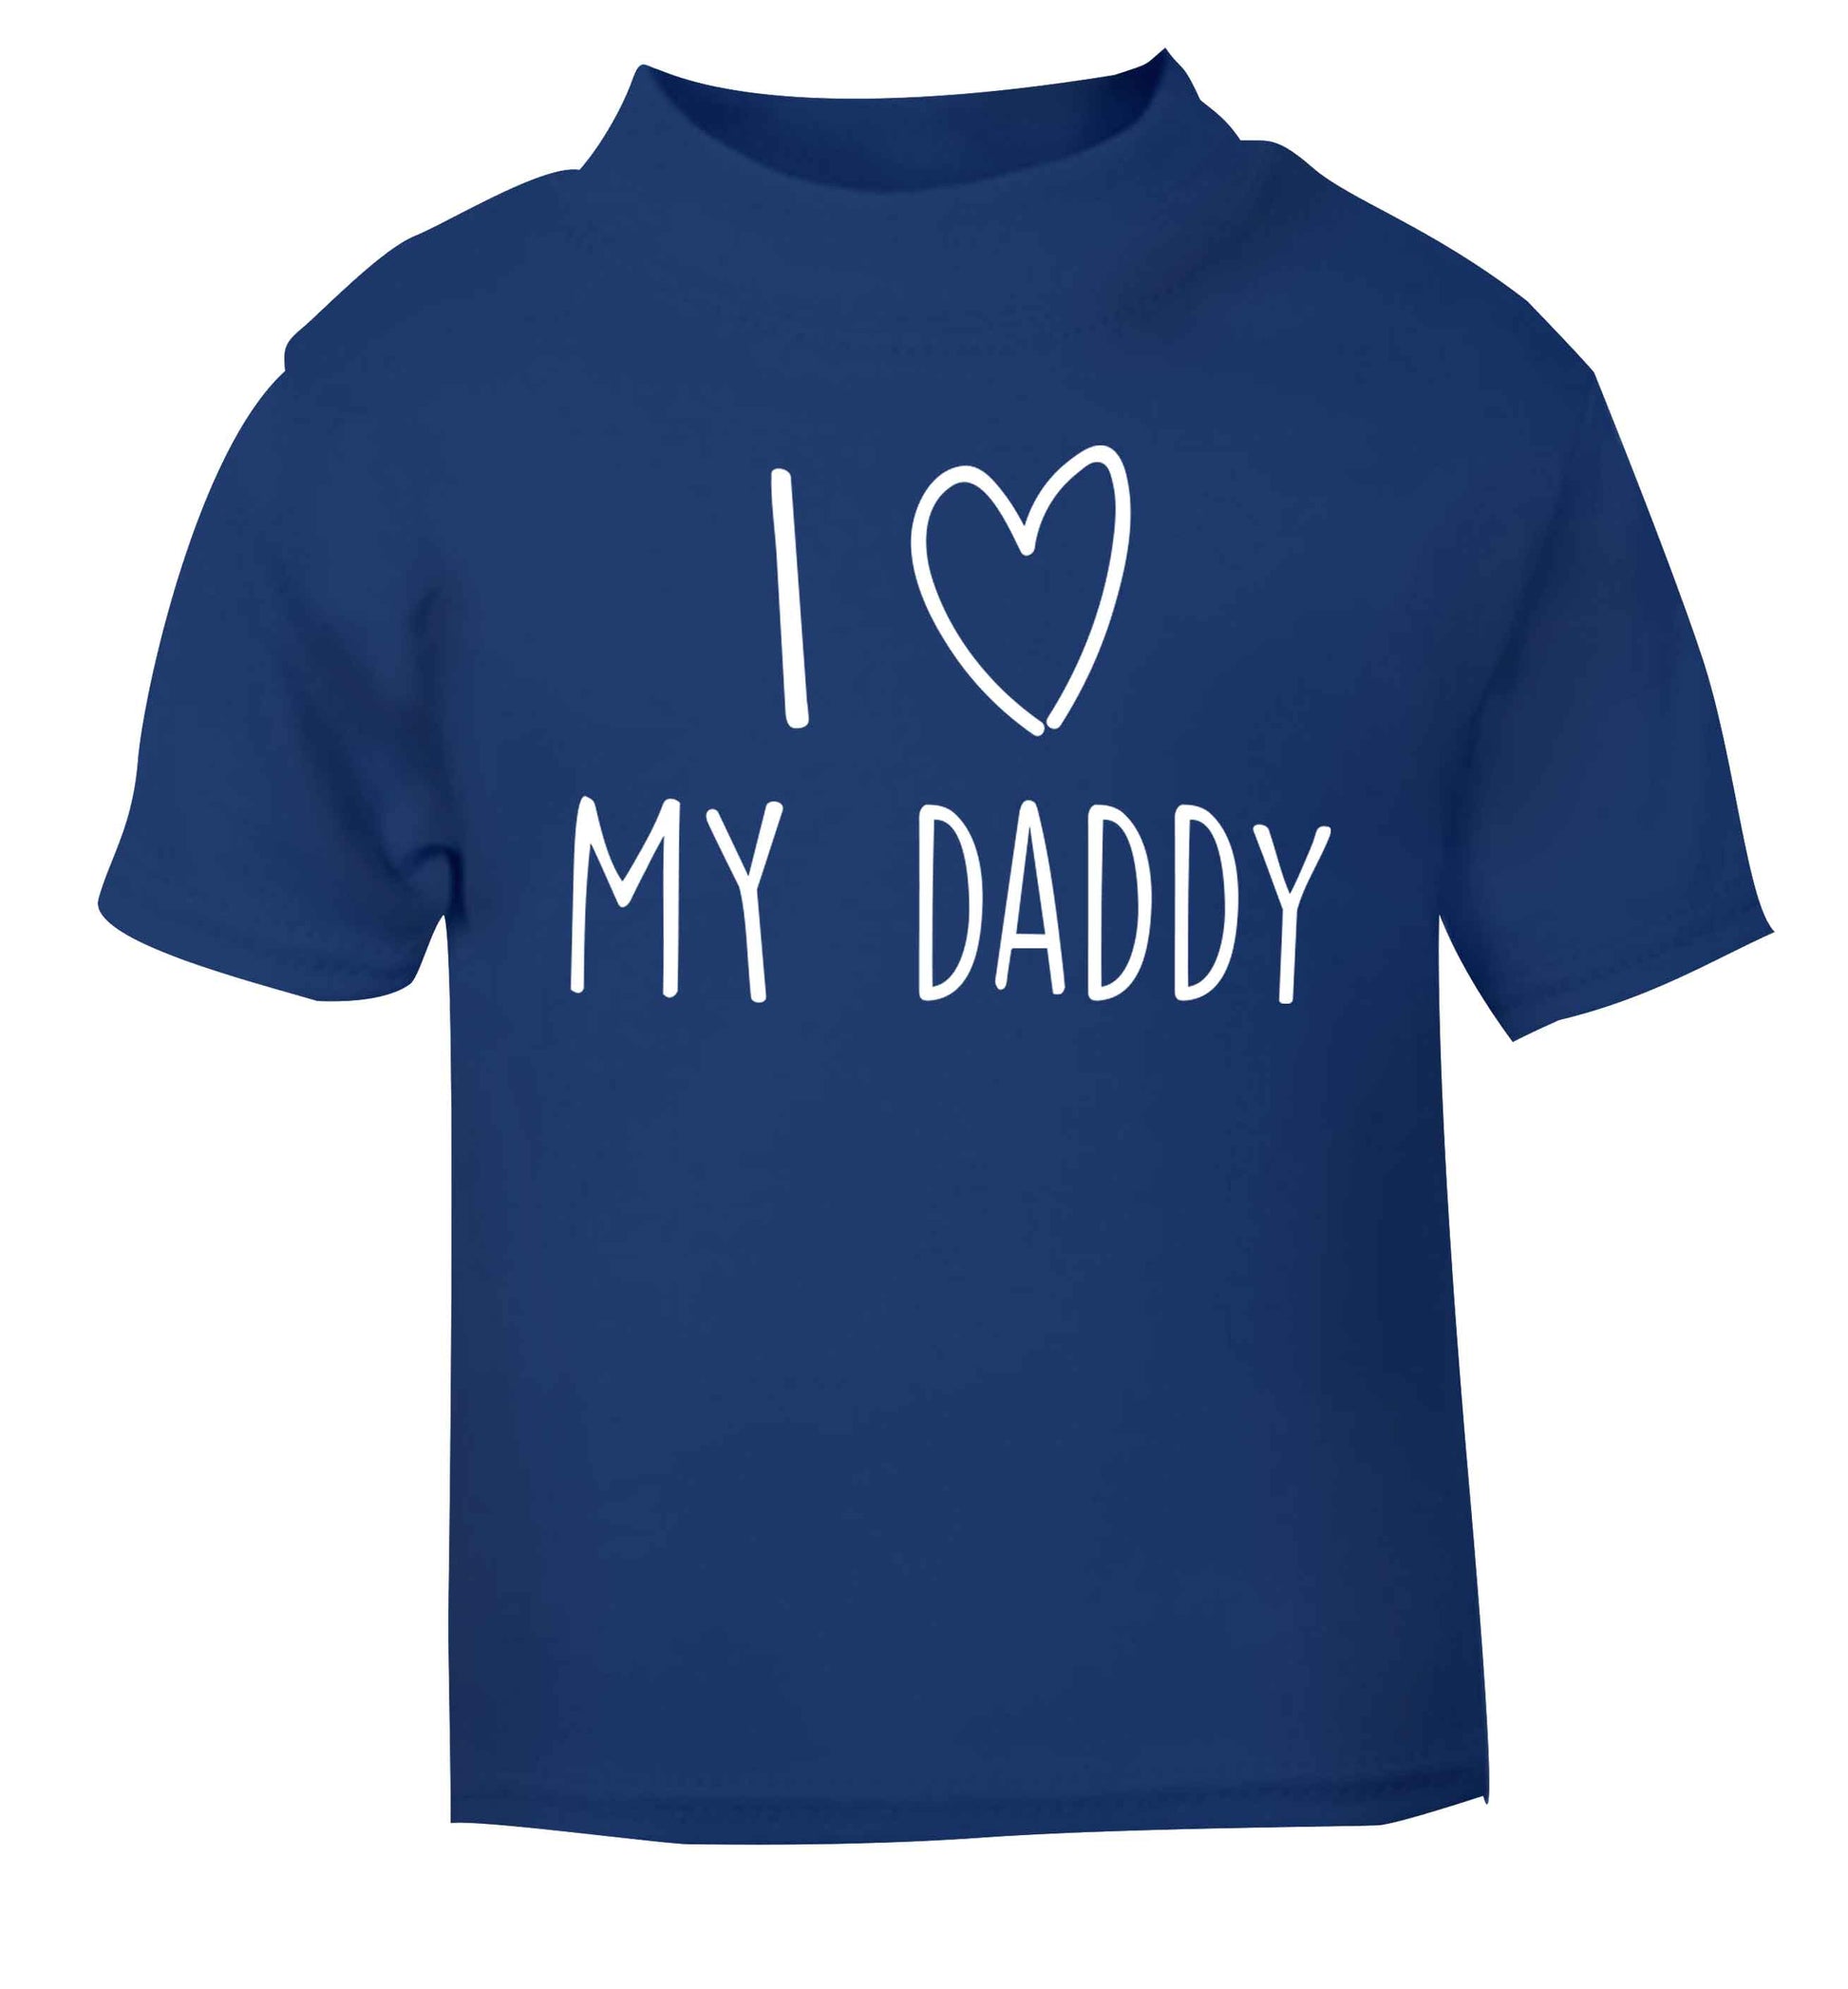 I love my daddy blue baby toddler Tshirt 2 Years